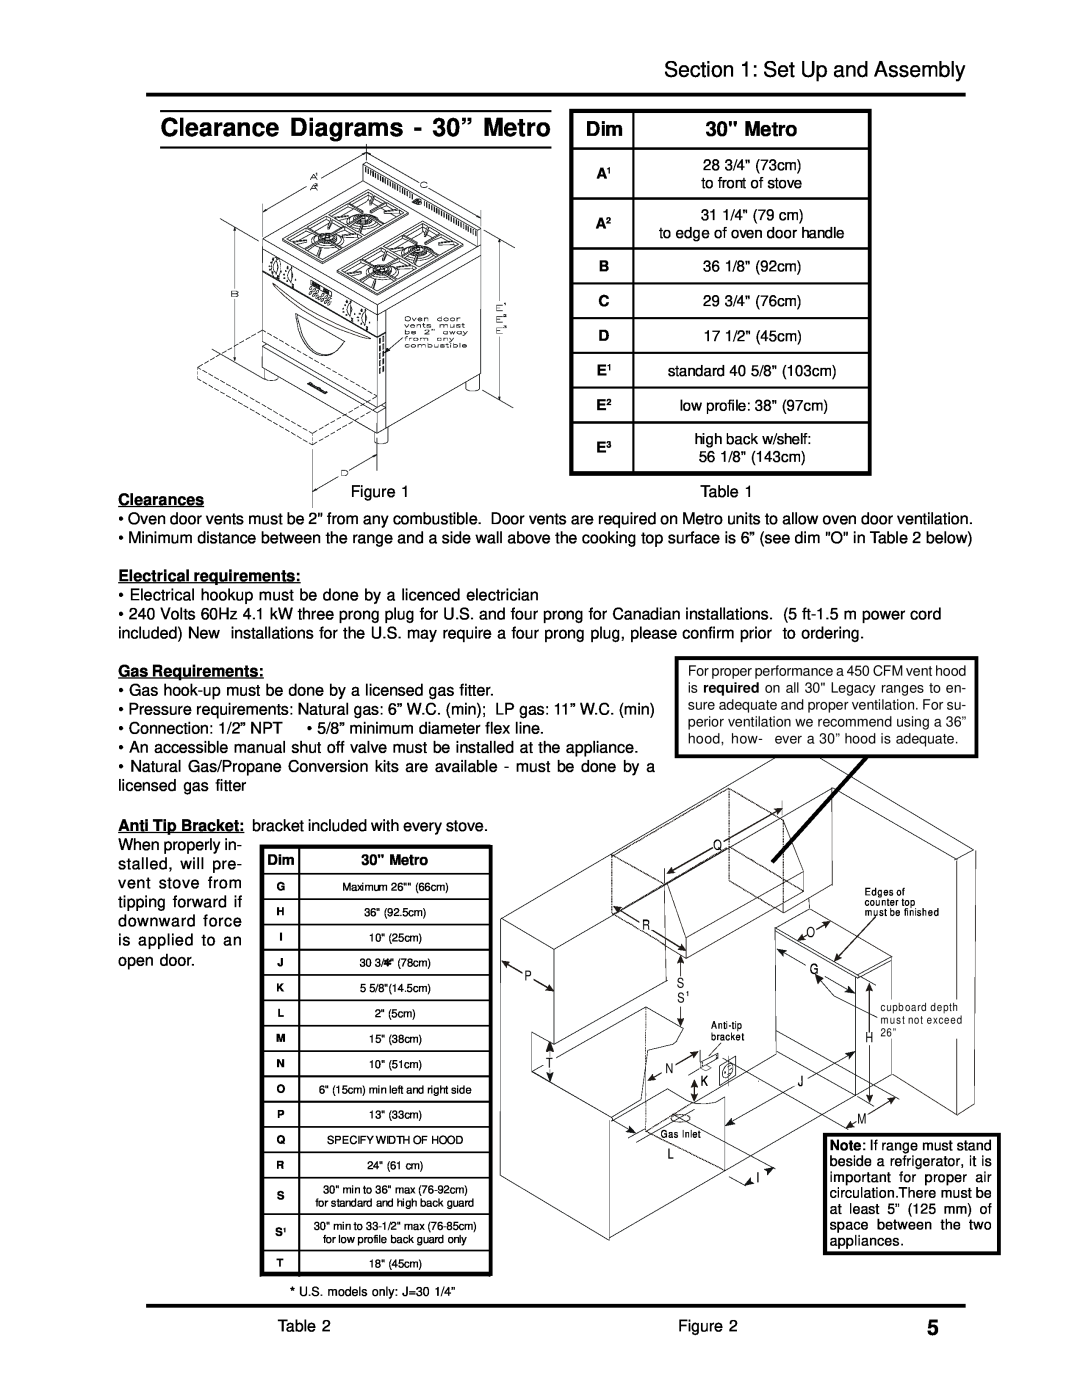 Heartland 3630 Clearance Diagrams - 30” Metro, Set Up and Assembly, Clearances, Electrical requirements, Gas Requirements 